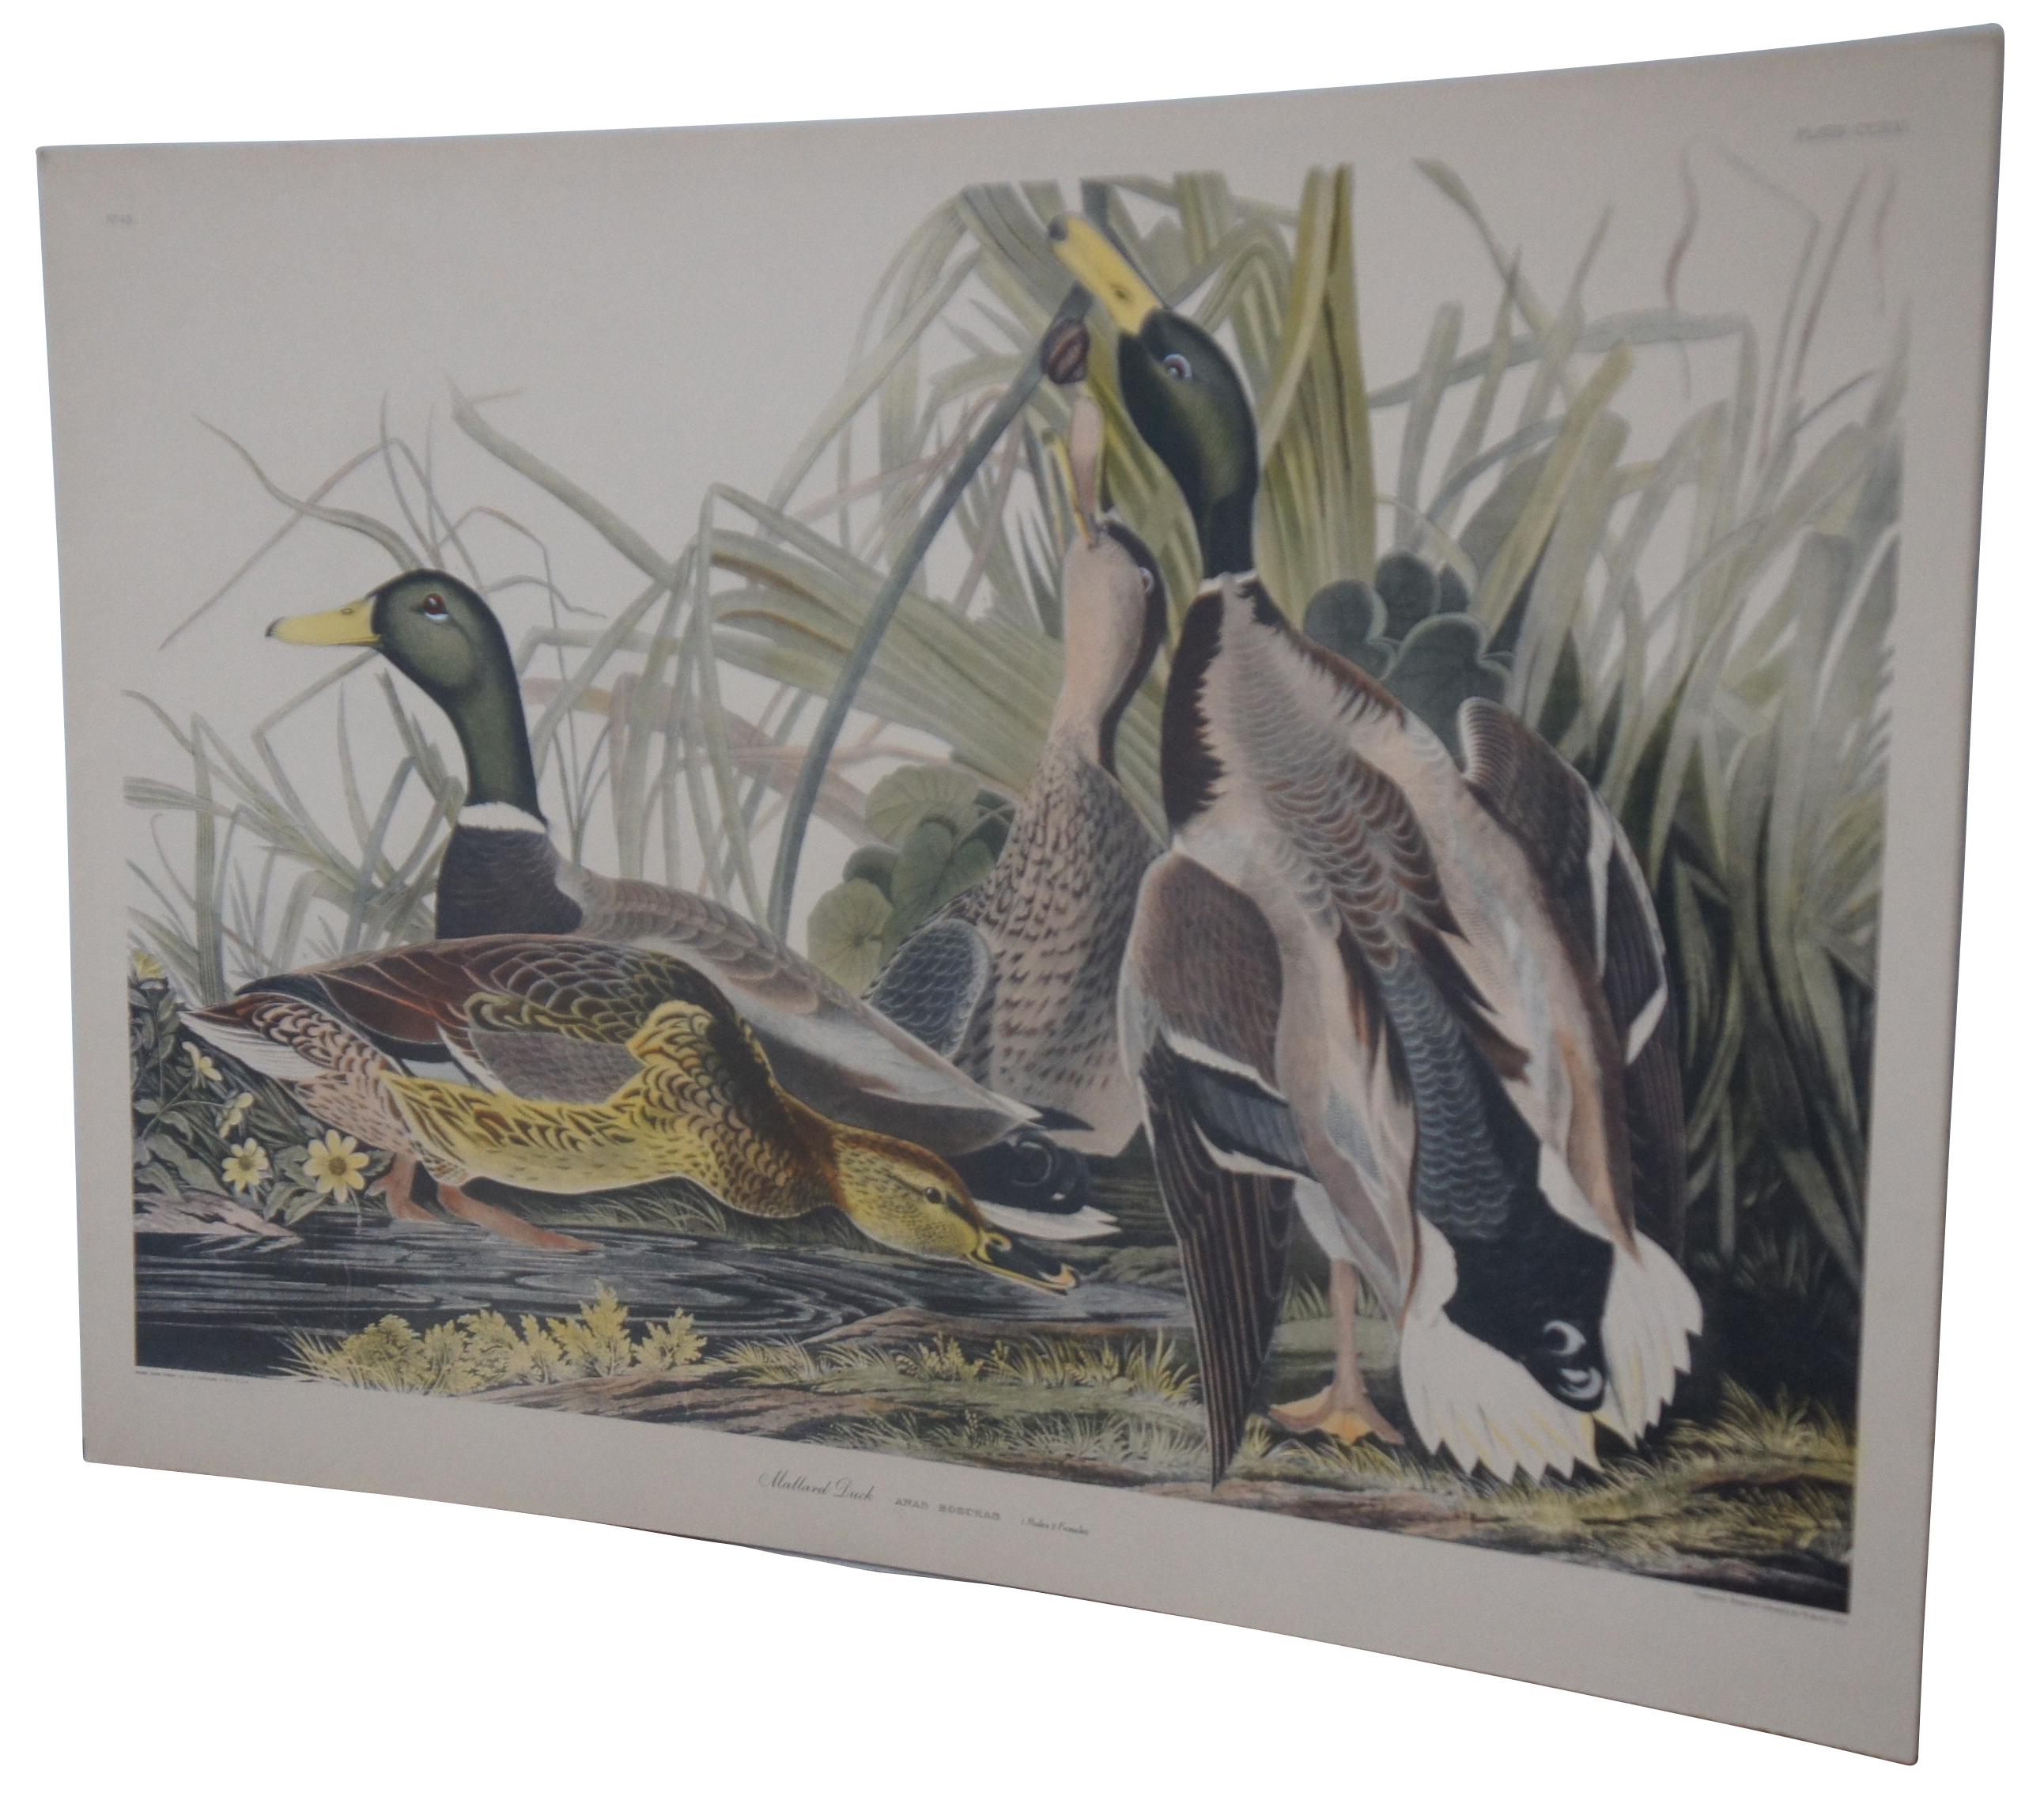 20th century Robert Havell colored engraving featuring two pairs of Mallard Ducks drawn by J.J Audubon. “Born in Reading, England, Robert Havell (1793-1878) was the son of an engraver, and was expected to follow that profession. Fulfilling his